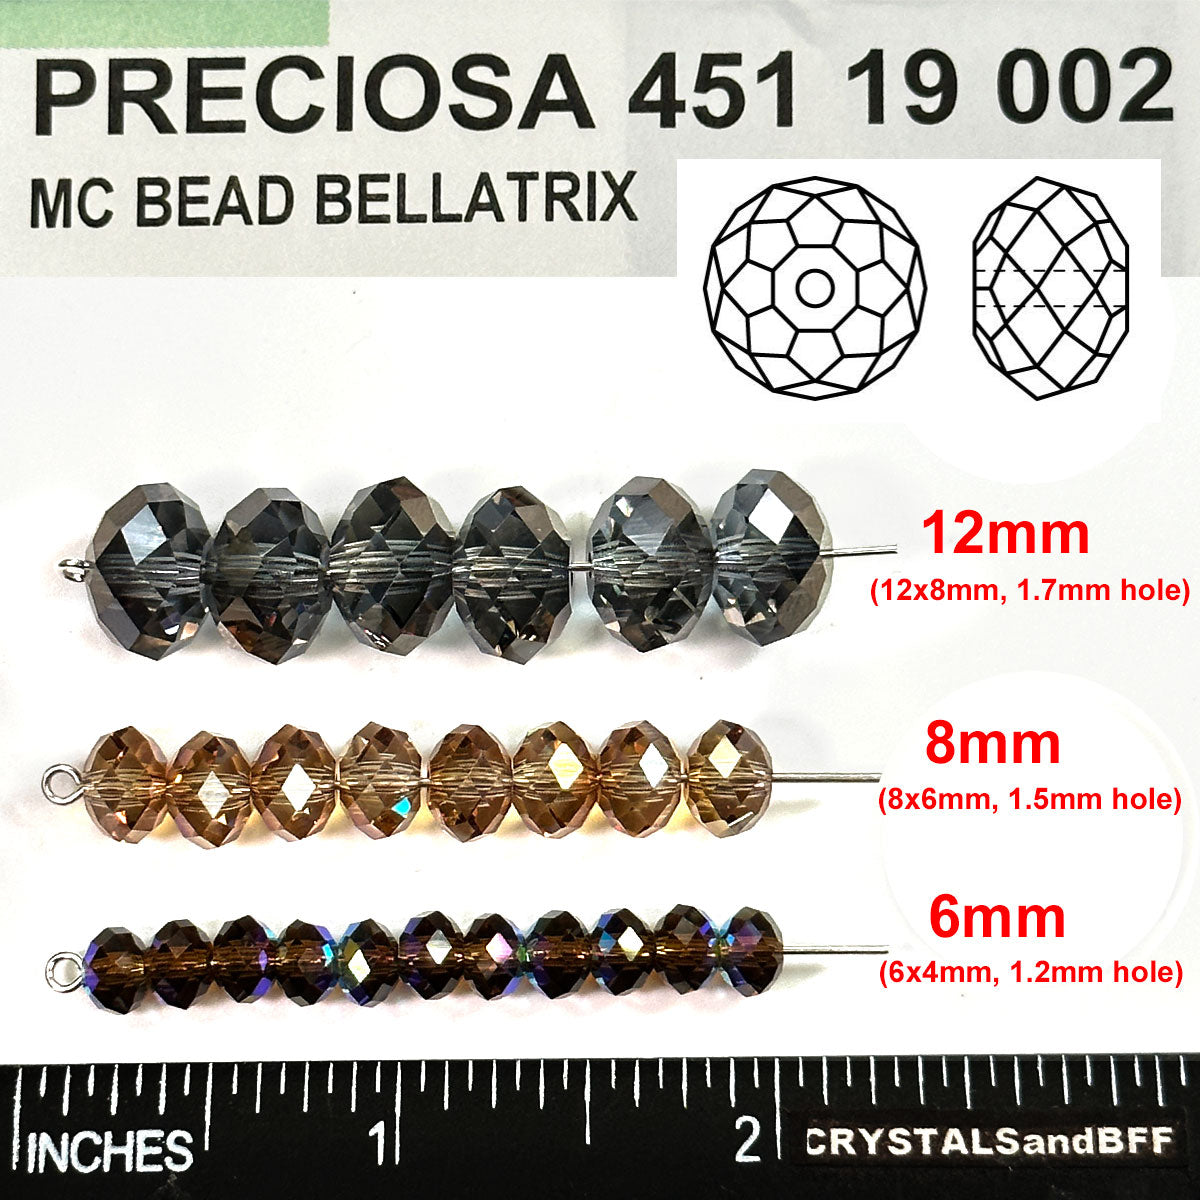 Smoked Topaz AB coated, Czech Machine Cut Bellatrix Crystal Beads, Preciosa 451-19-002, 6mm, 36pcs, brown with Aurora Boreale spacer beads, #5040 Briolette cut